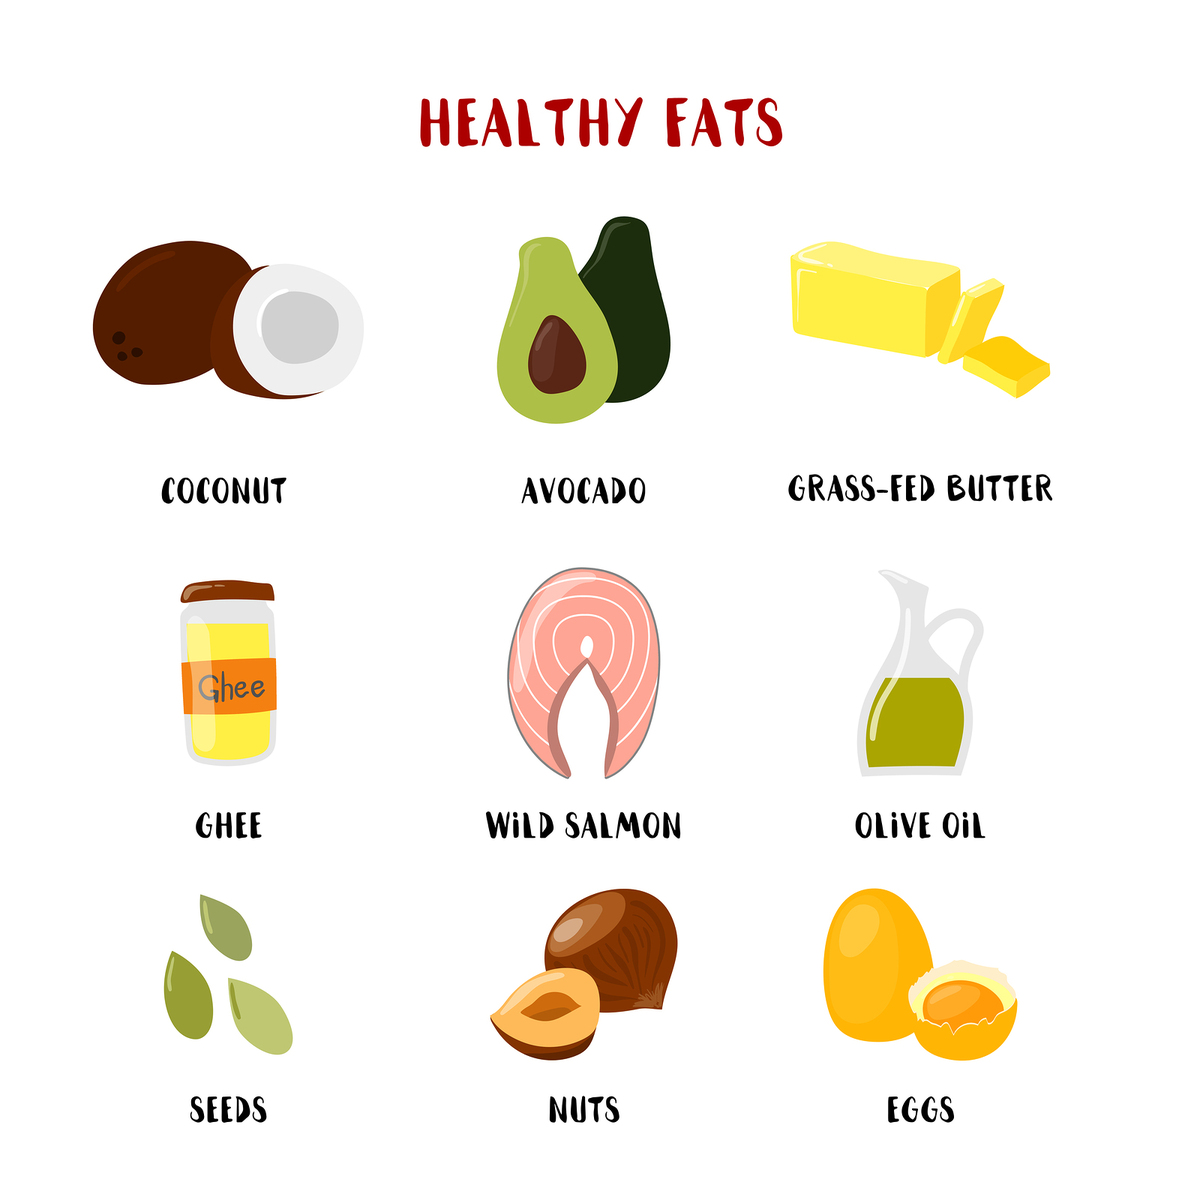 Saturated Fats Worse For Heart Health Erection Health Online Prescription Medications 